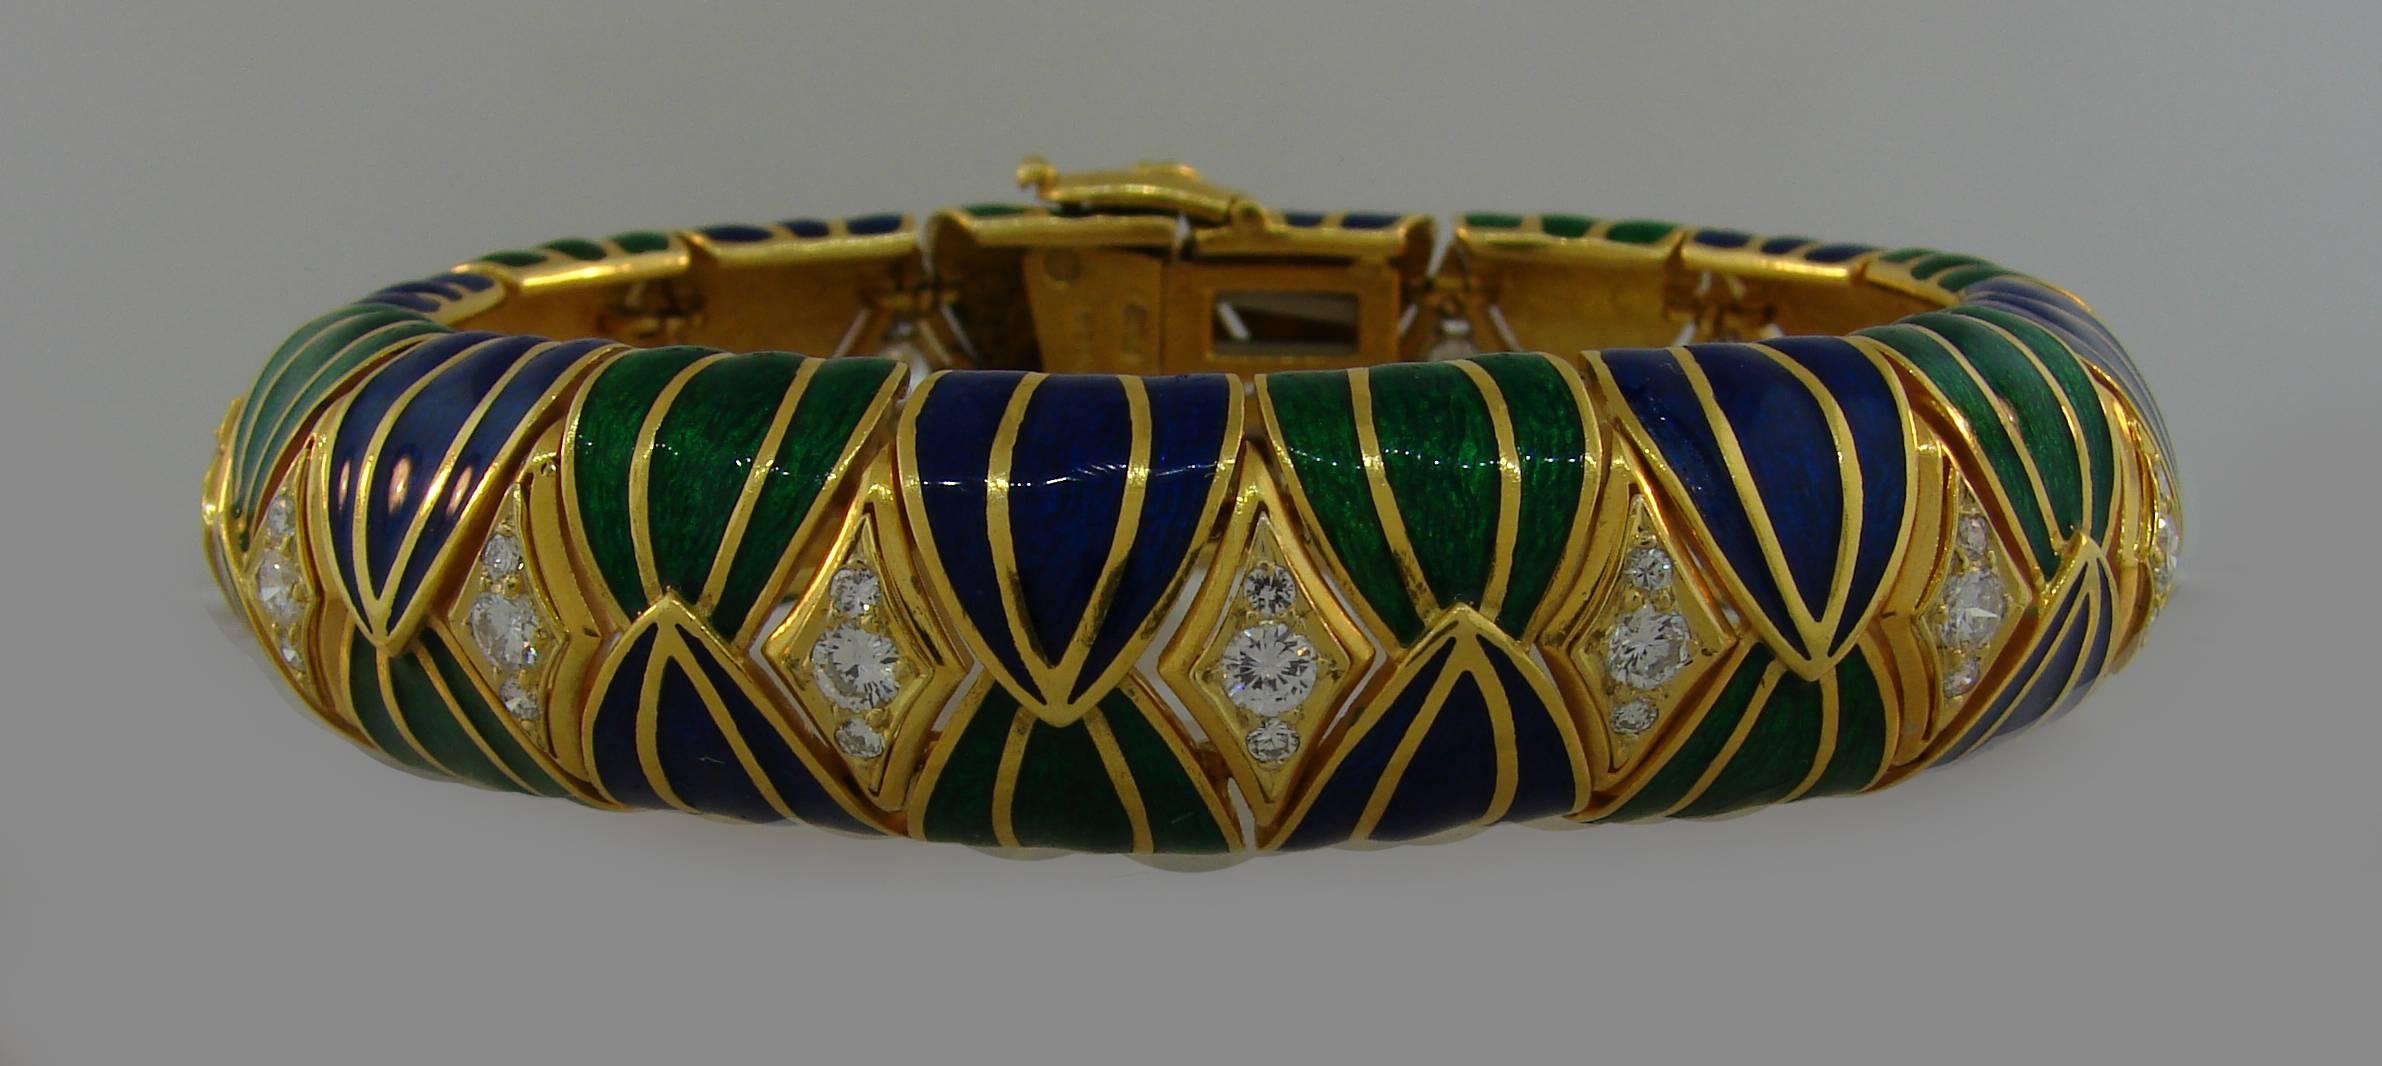 Bold and colorful bracelet created by David Webb in the 1980's.Tasteful combination of blue, green and yellow sprinkled with white diamond sparkle, three-dimensional design and volume are the highlights of this stylish piece. Wearable and chic, the